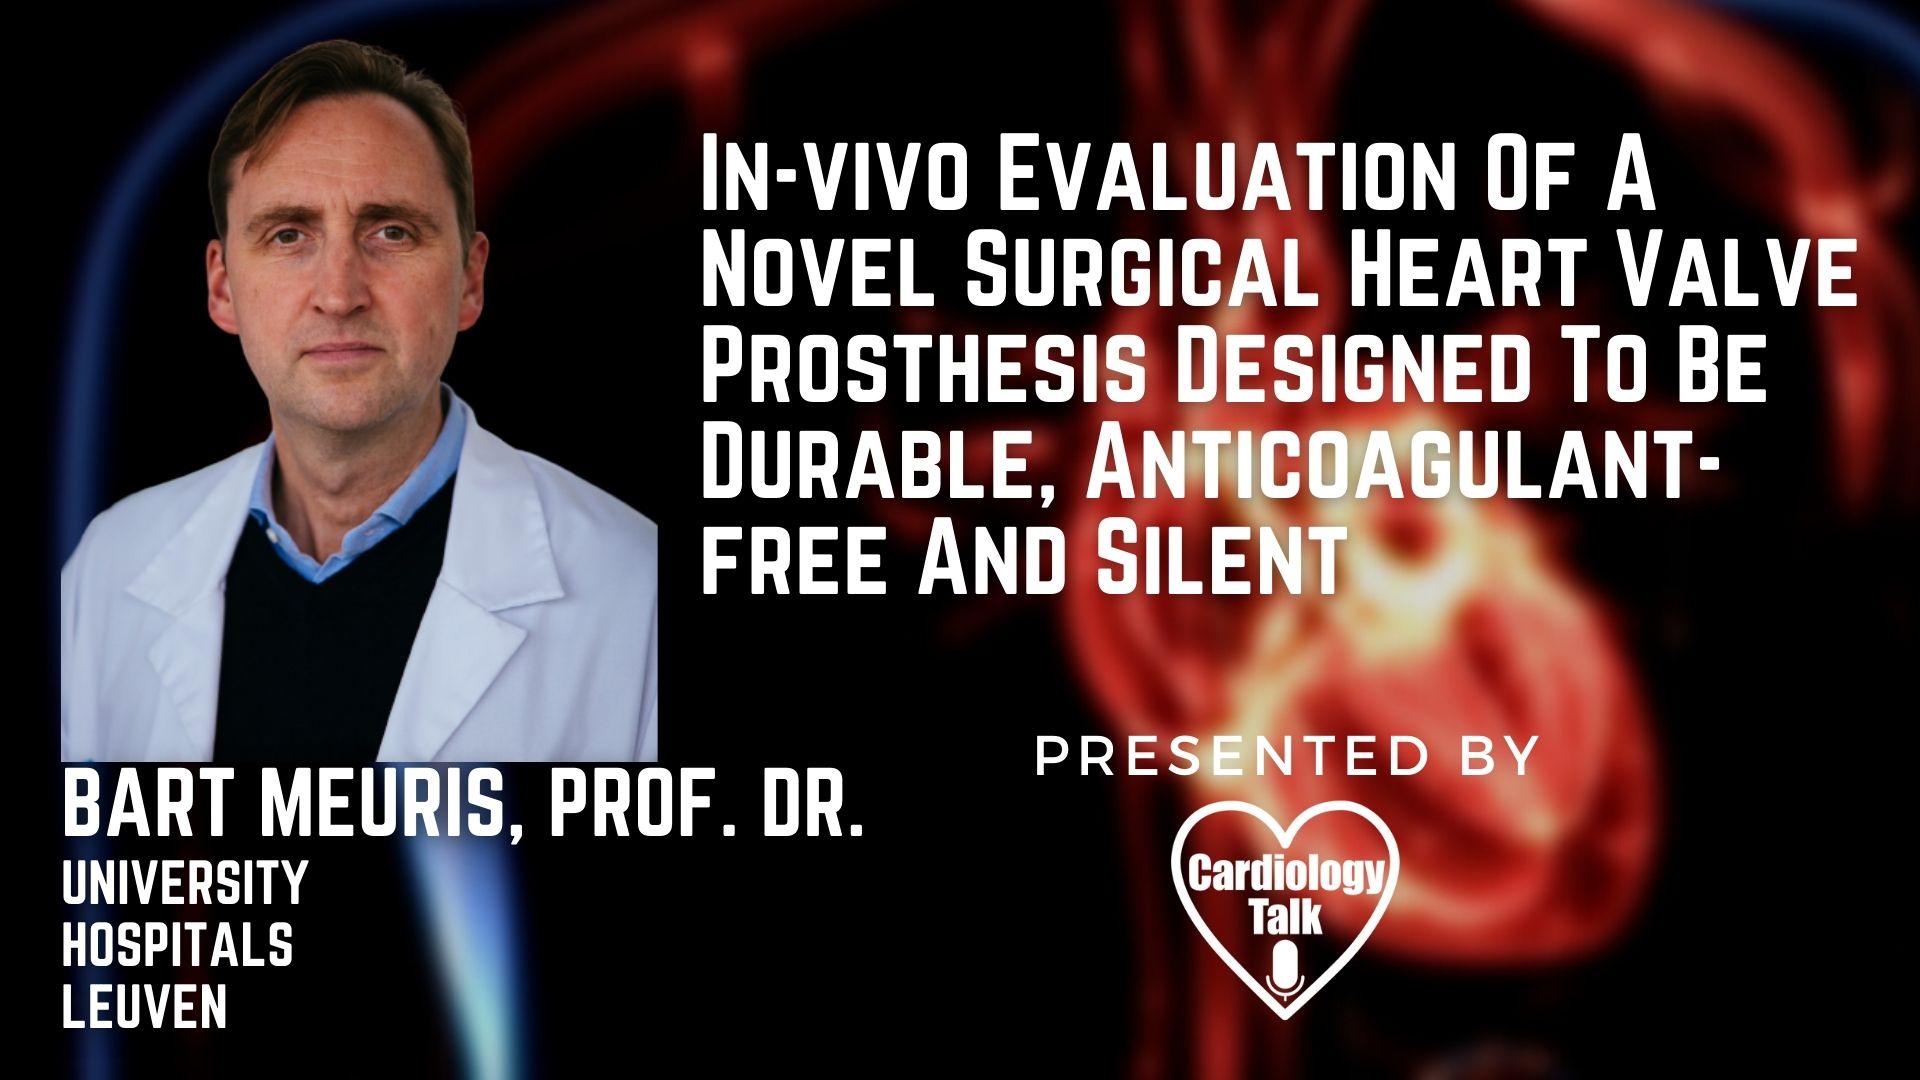 Bart Meuris, prof. dr. @UZLeuven @HeartValveOrg #Cardiology #Research In-vivo Evaluation Of A Novel Surgical Heart Valve Prosthesis Designed To Be Durable, Anticoagulant-free And Silent